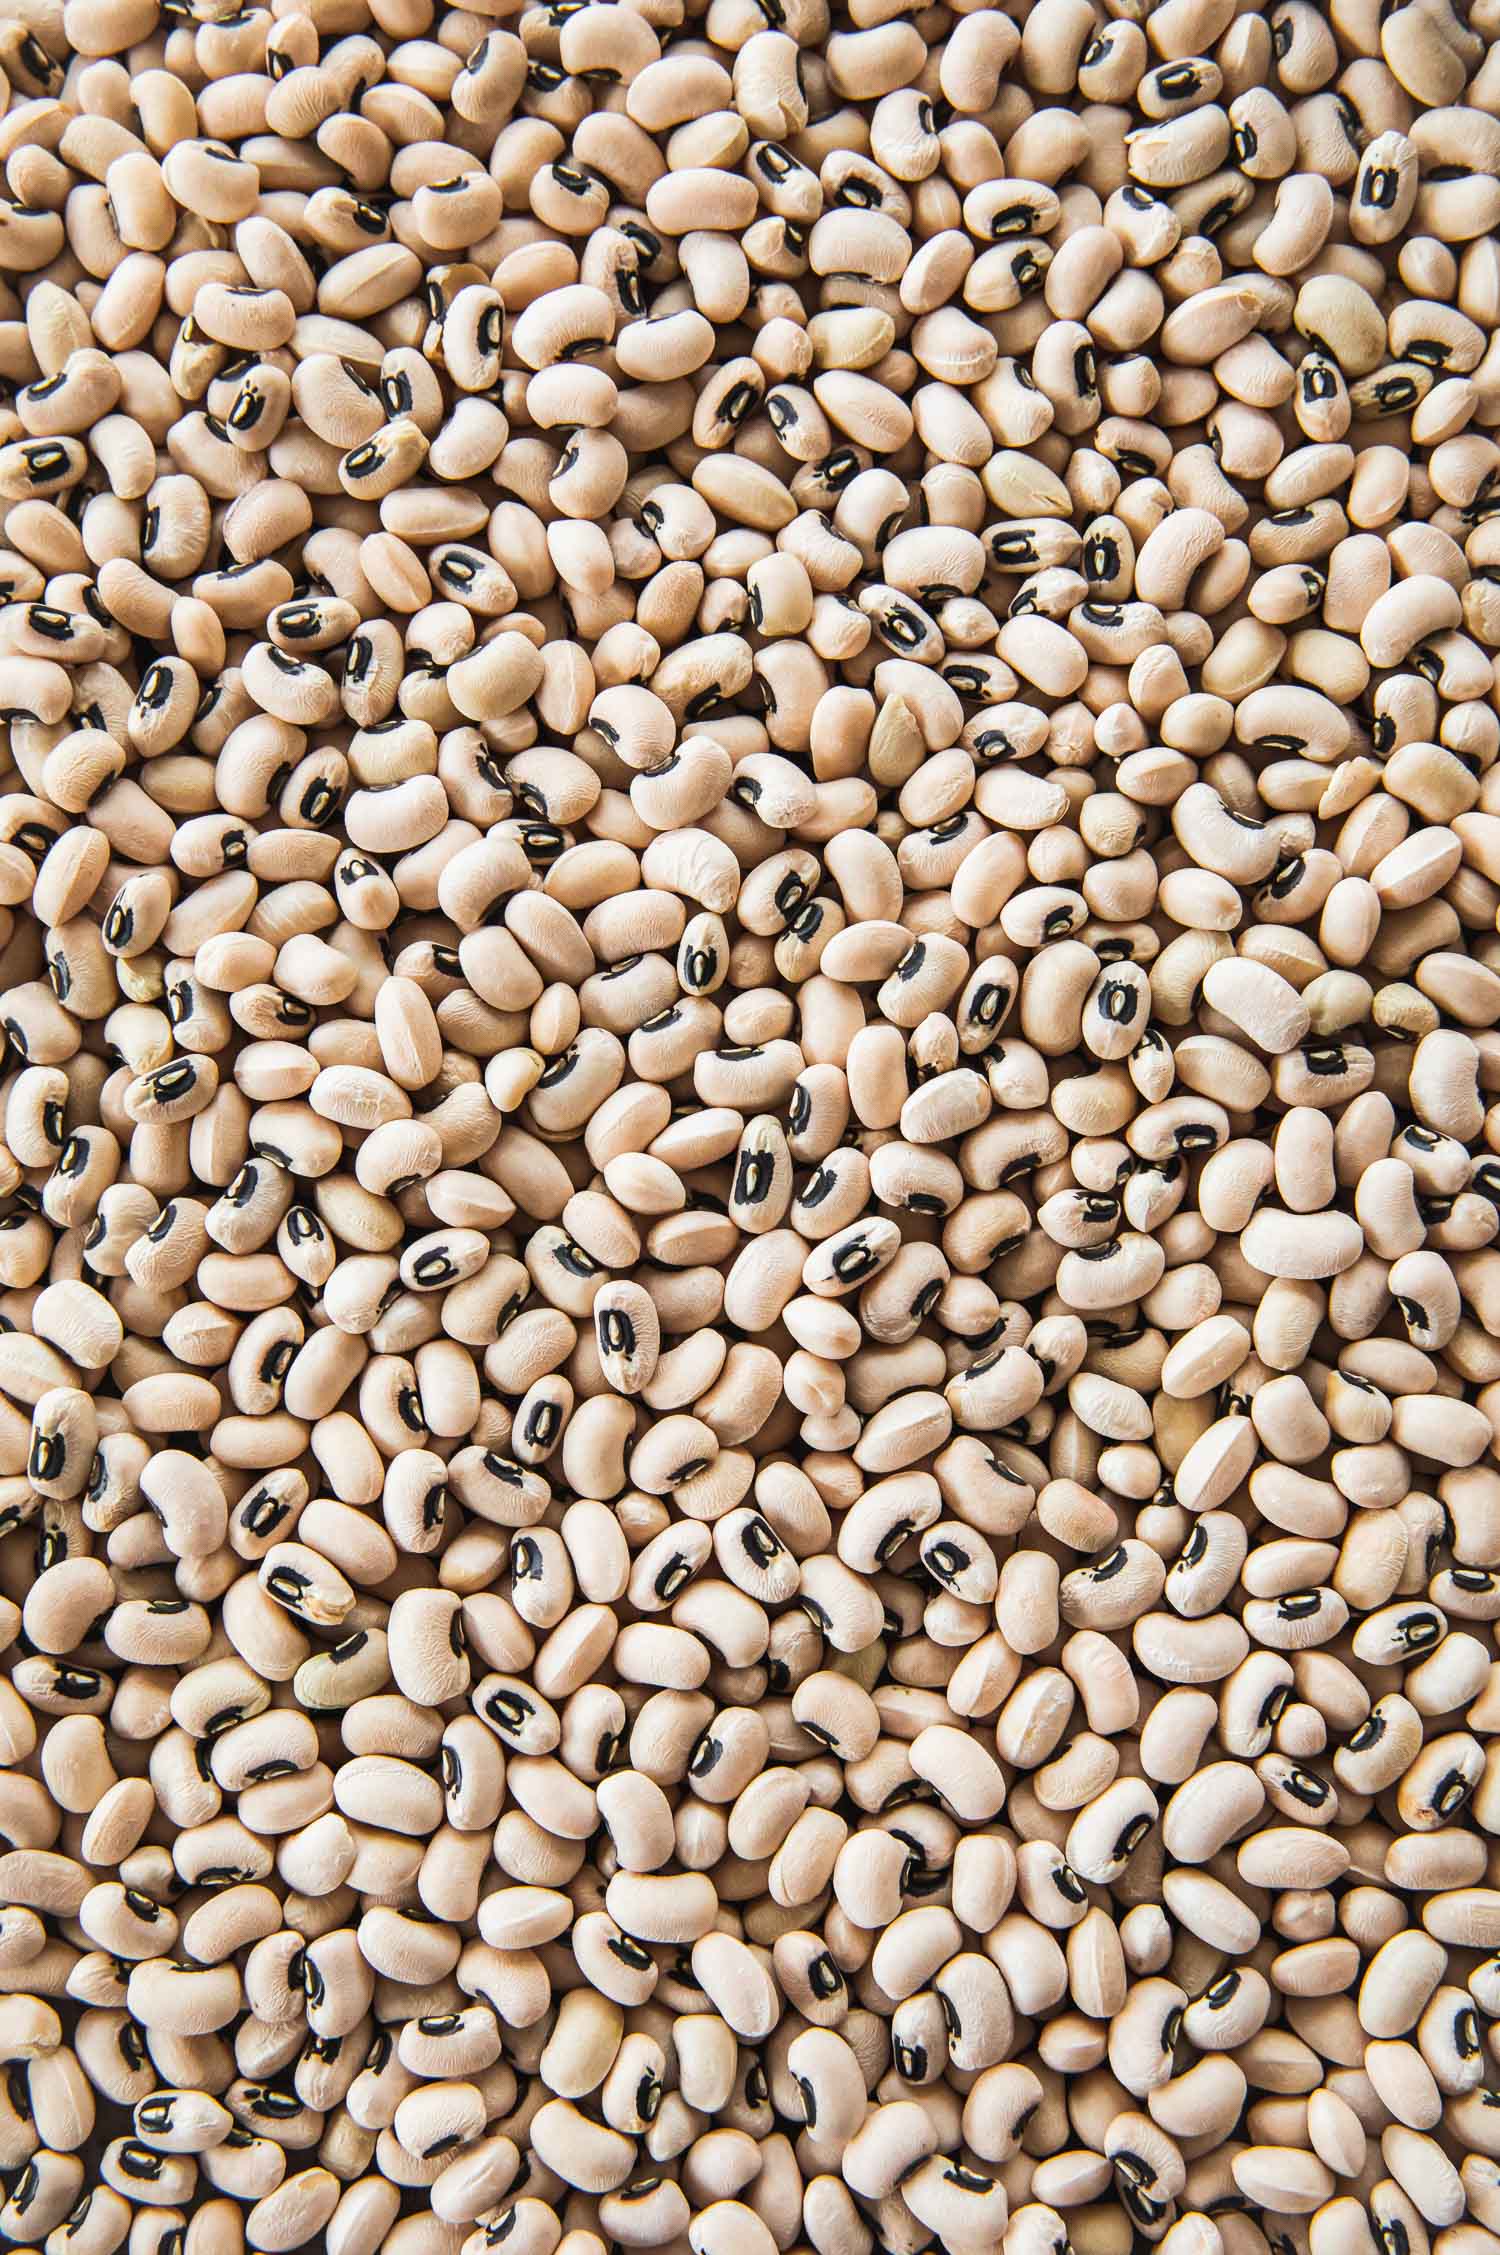 How To Cook Black-Eyed Peas From Scratch